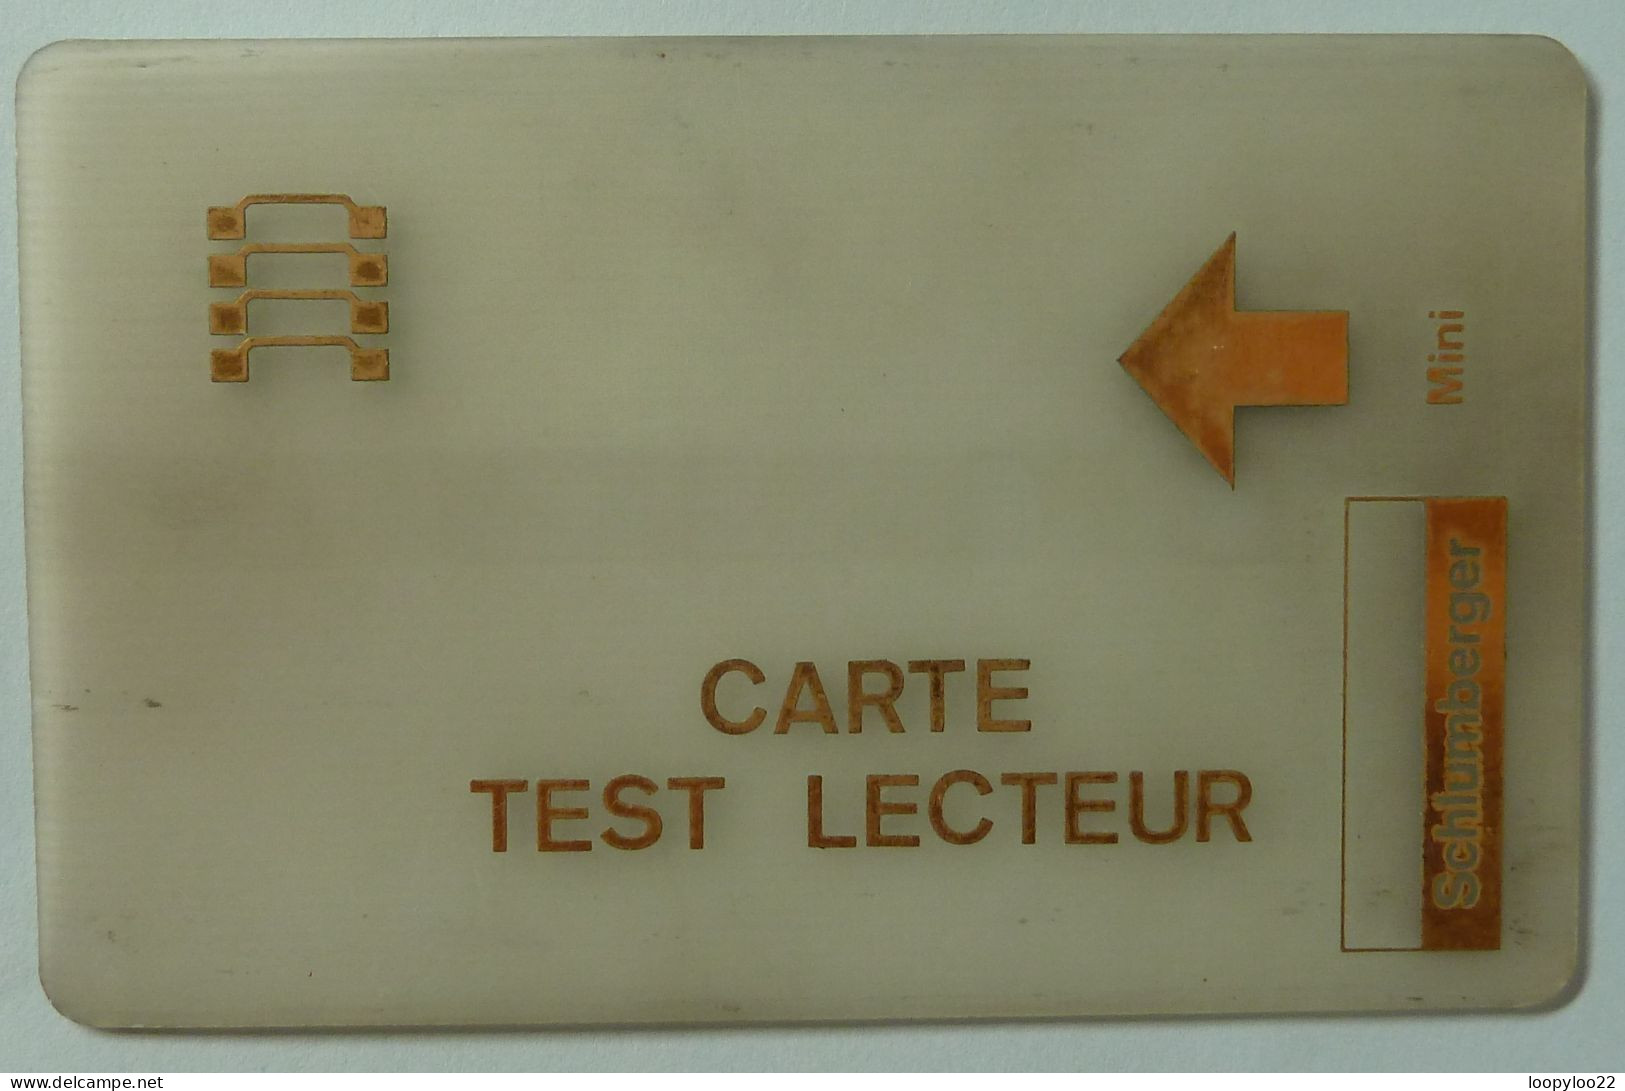 FRANCE - Test For Schlumberger - CARTE TEST LECTEUR - Used For Circuit Testing - R - Unclassified